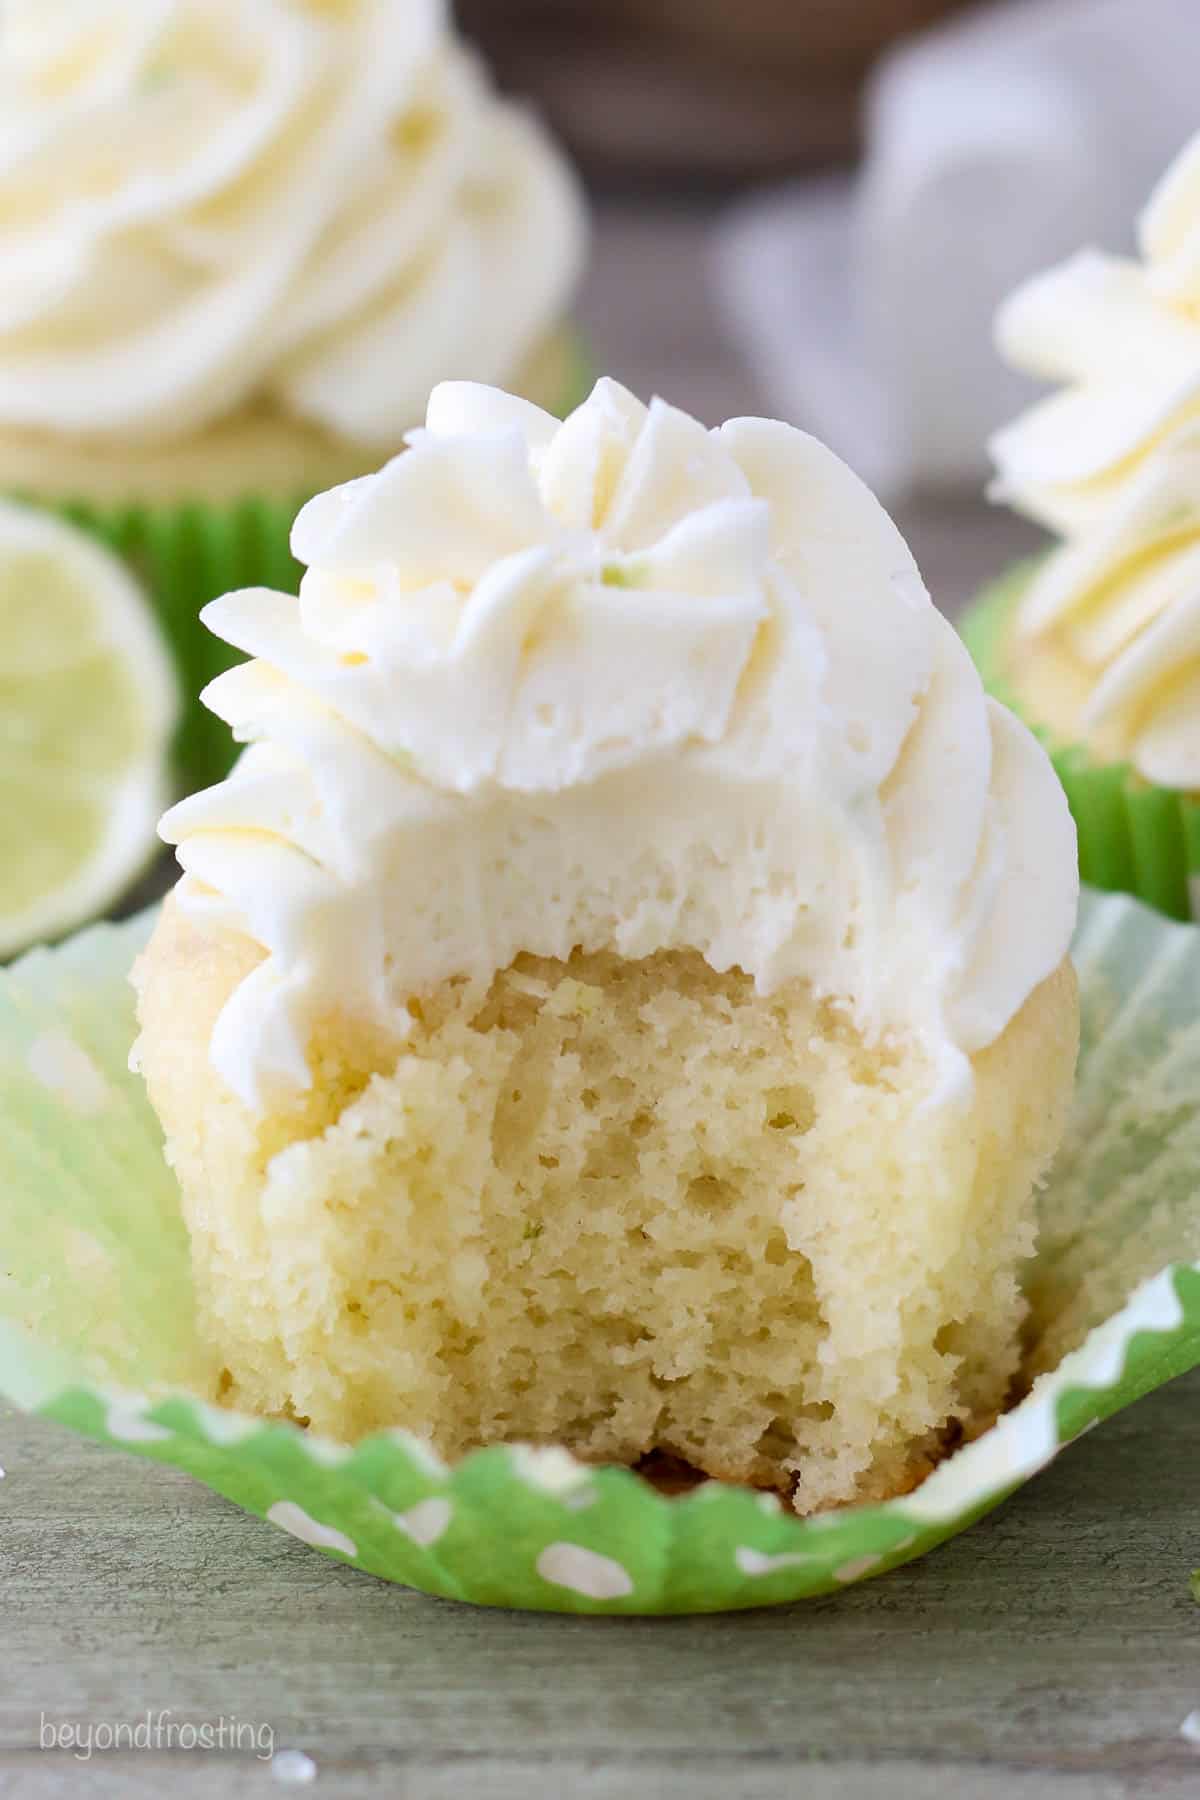 A vanilla cupcake with a bite missing